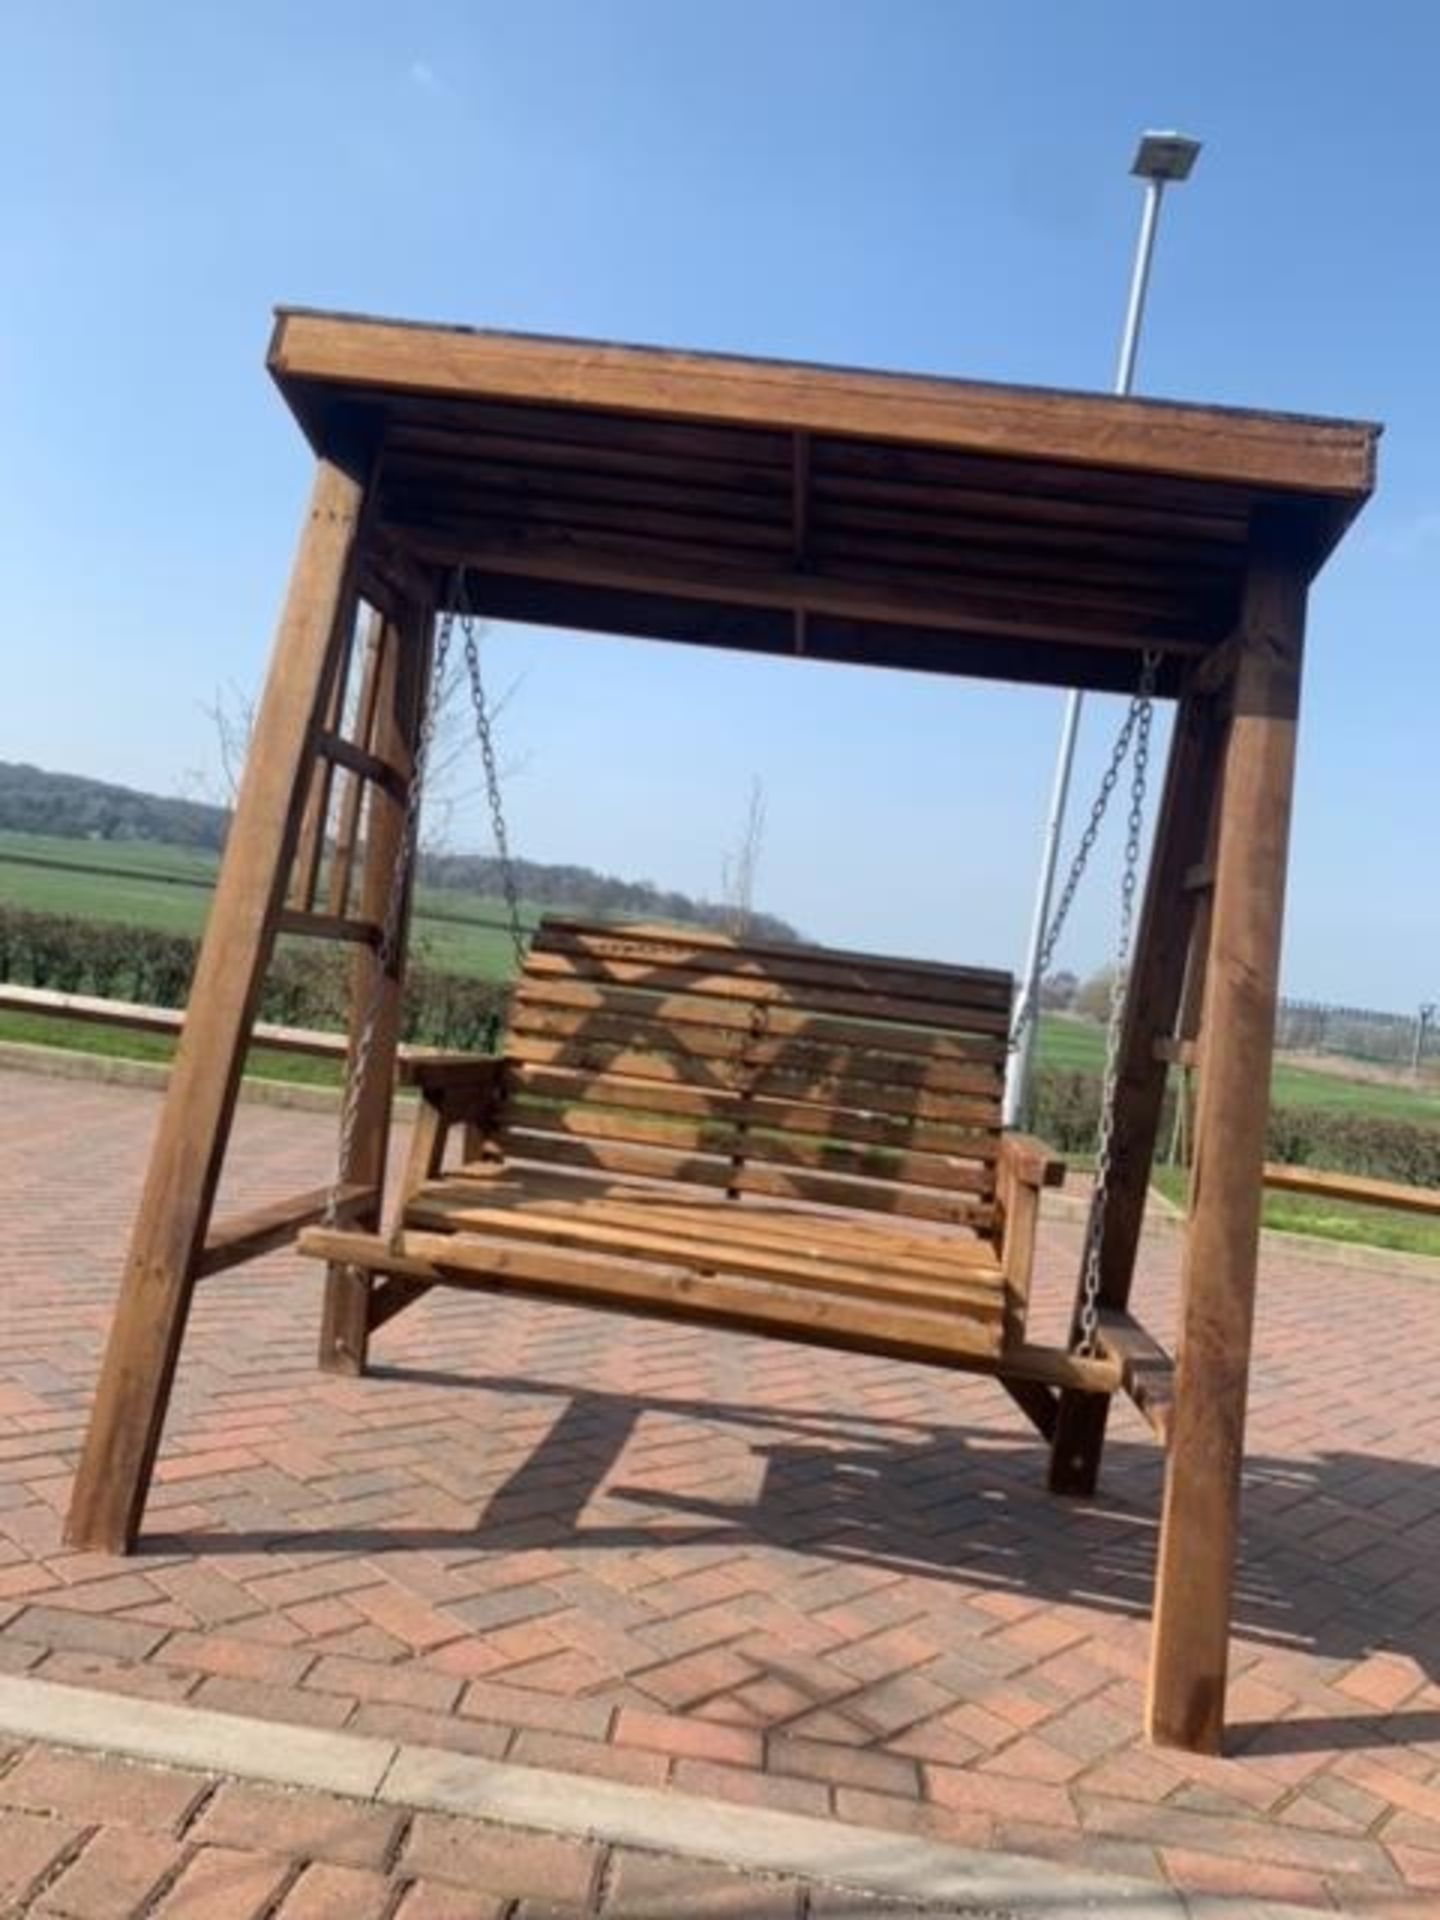 BRAND NEW QUALITY Swing bench Handcrafted Garden Furniture. 2 Seater Swing bench *NO VAT* - Image 3 of 3